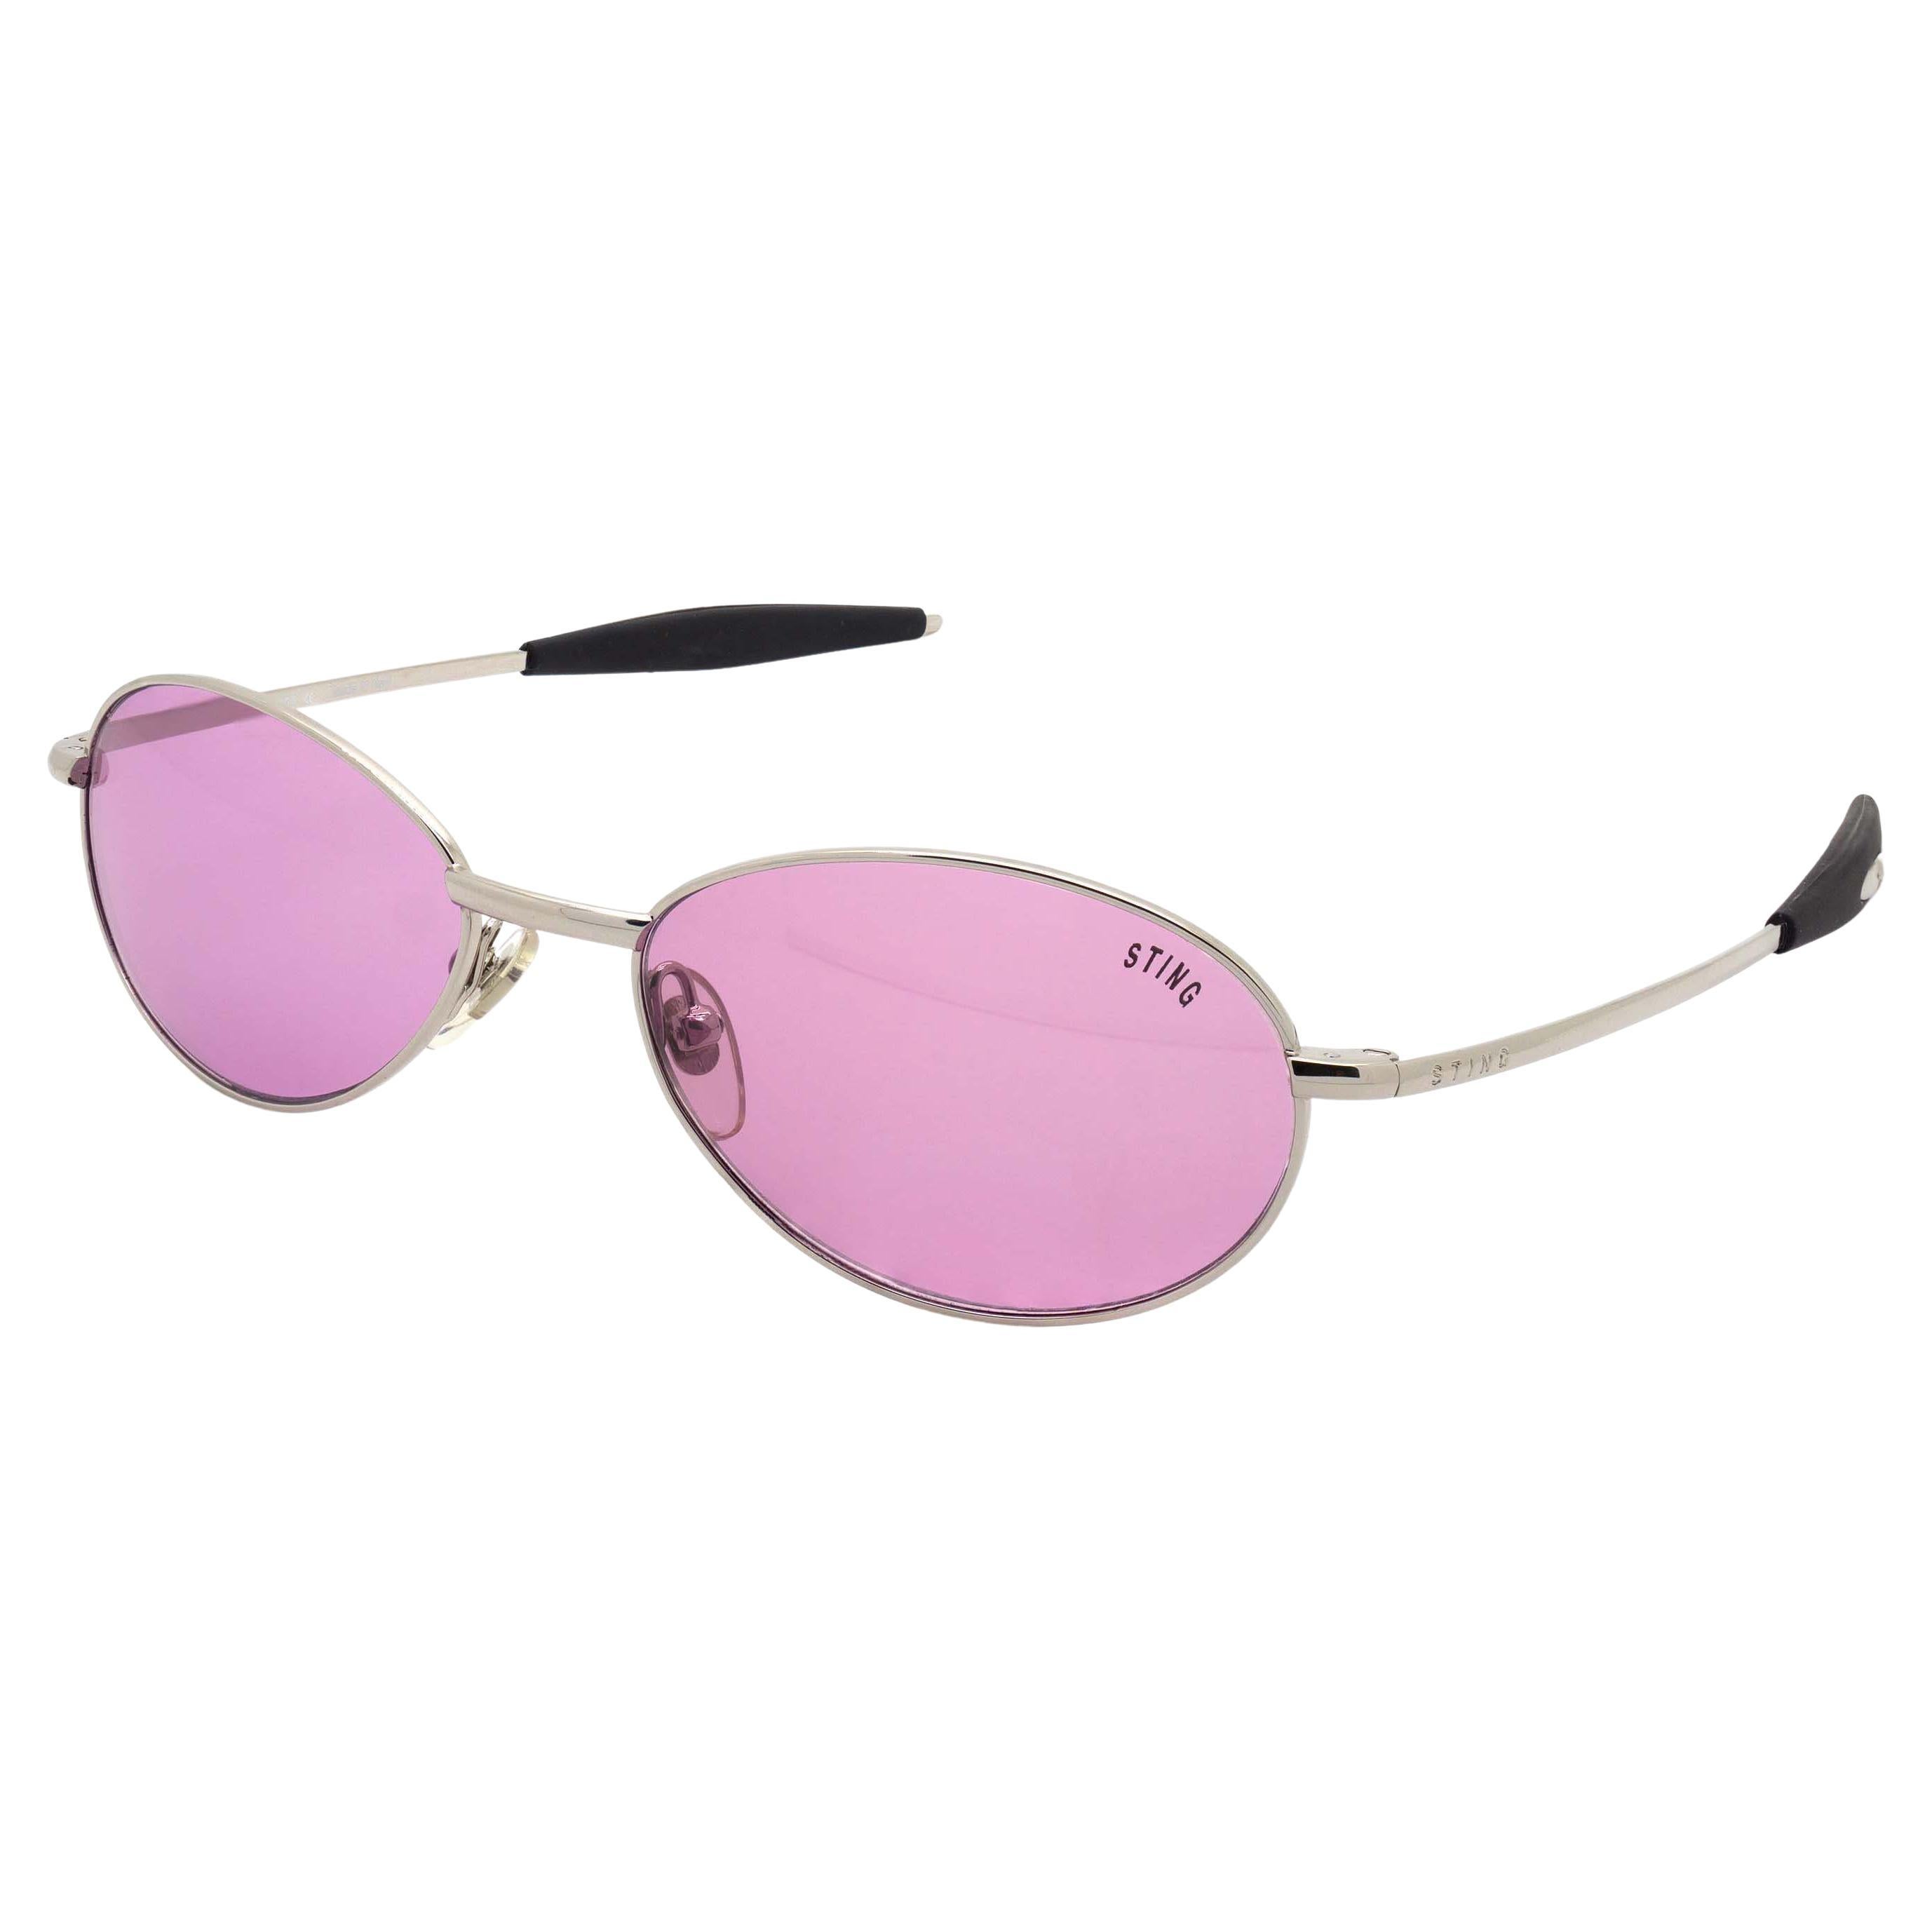 Sting vintage sunglasses pink, Italy For Sale at 1stDibs